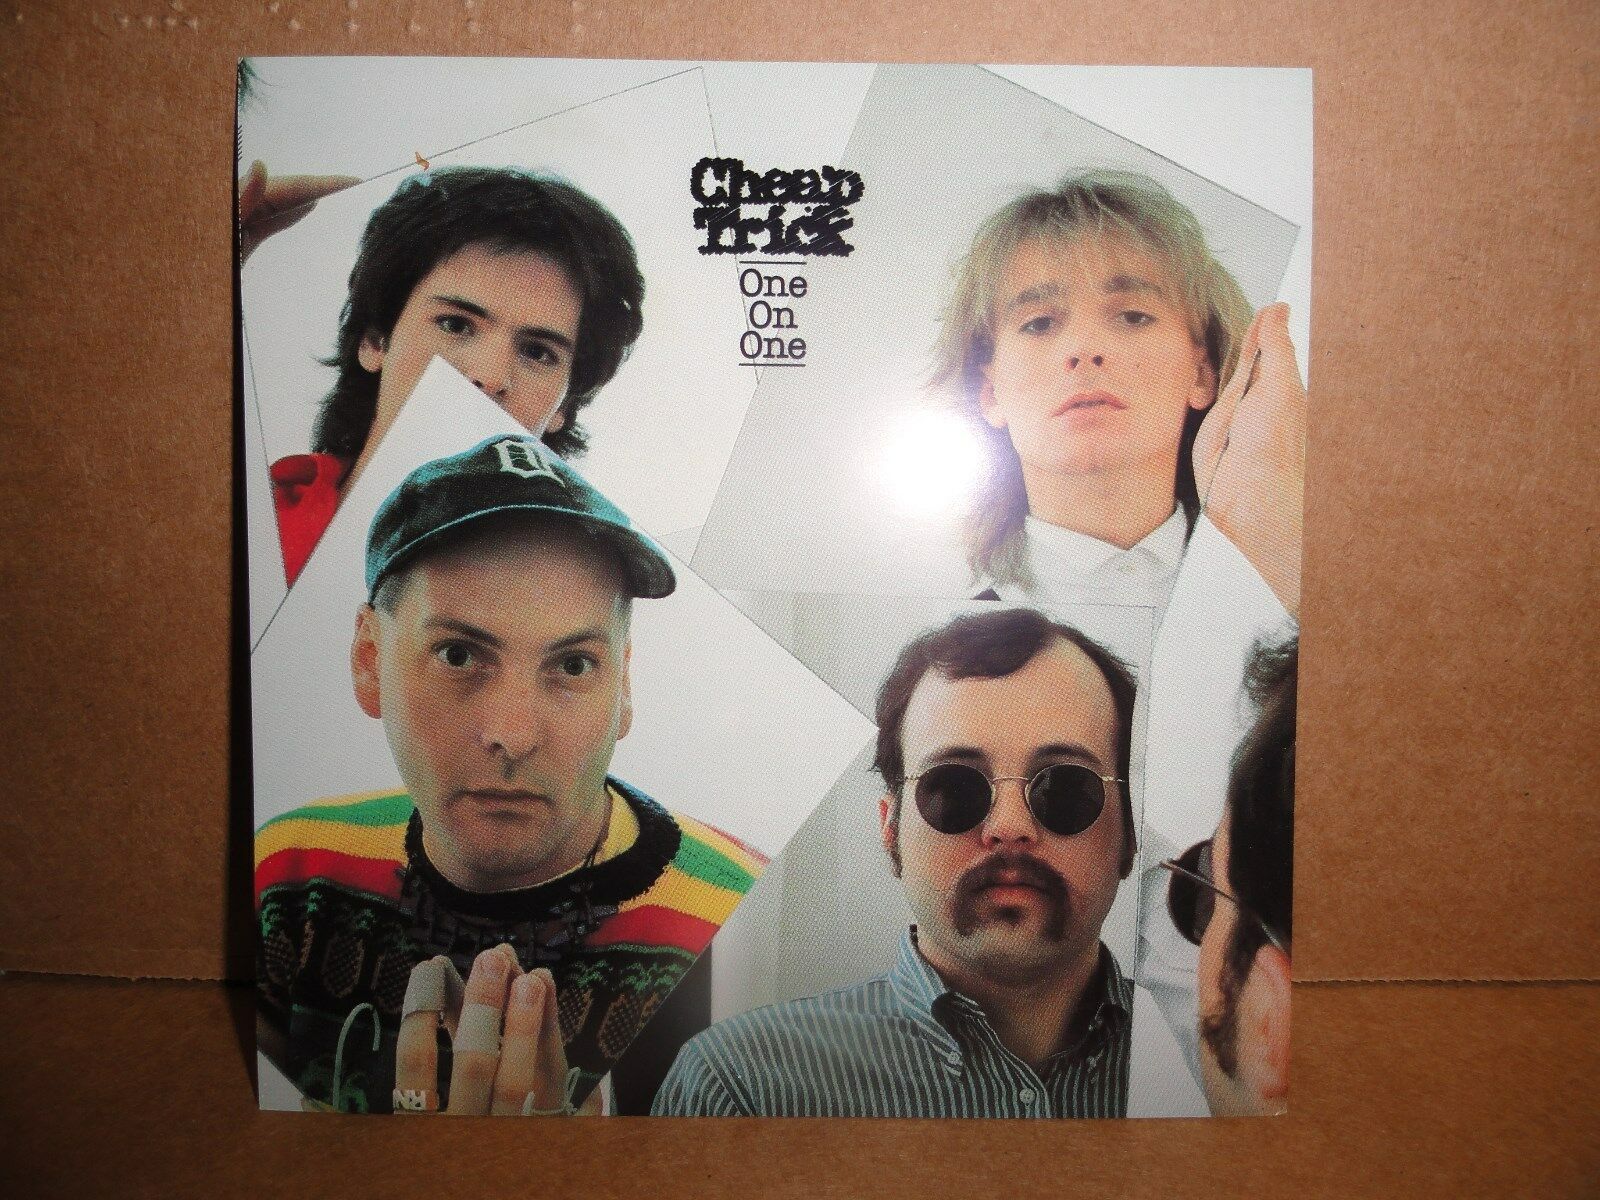 Cheap Trick     1982   Promo  Post Card     One On One